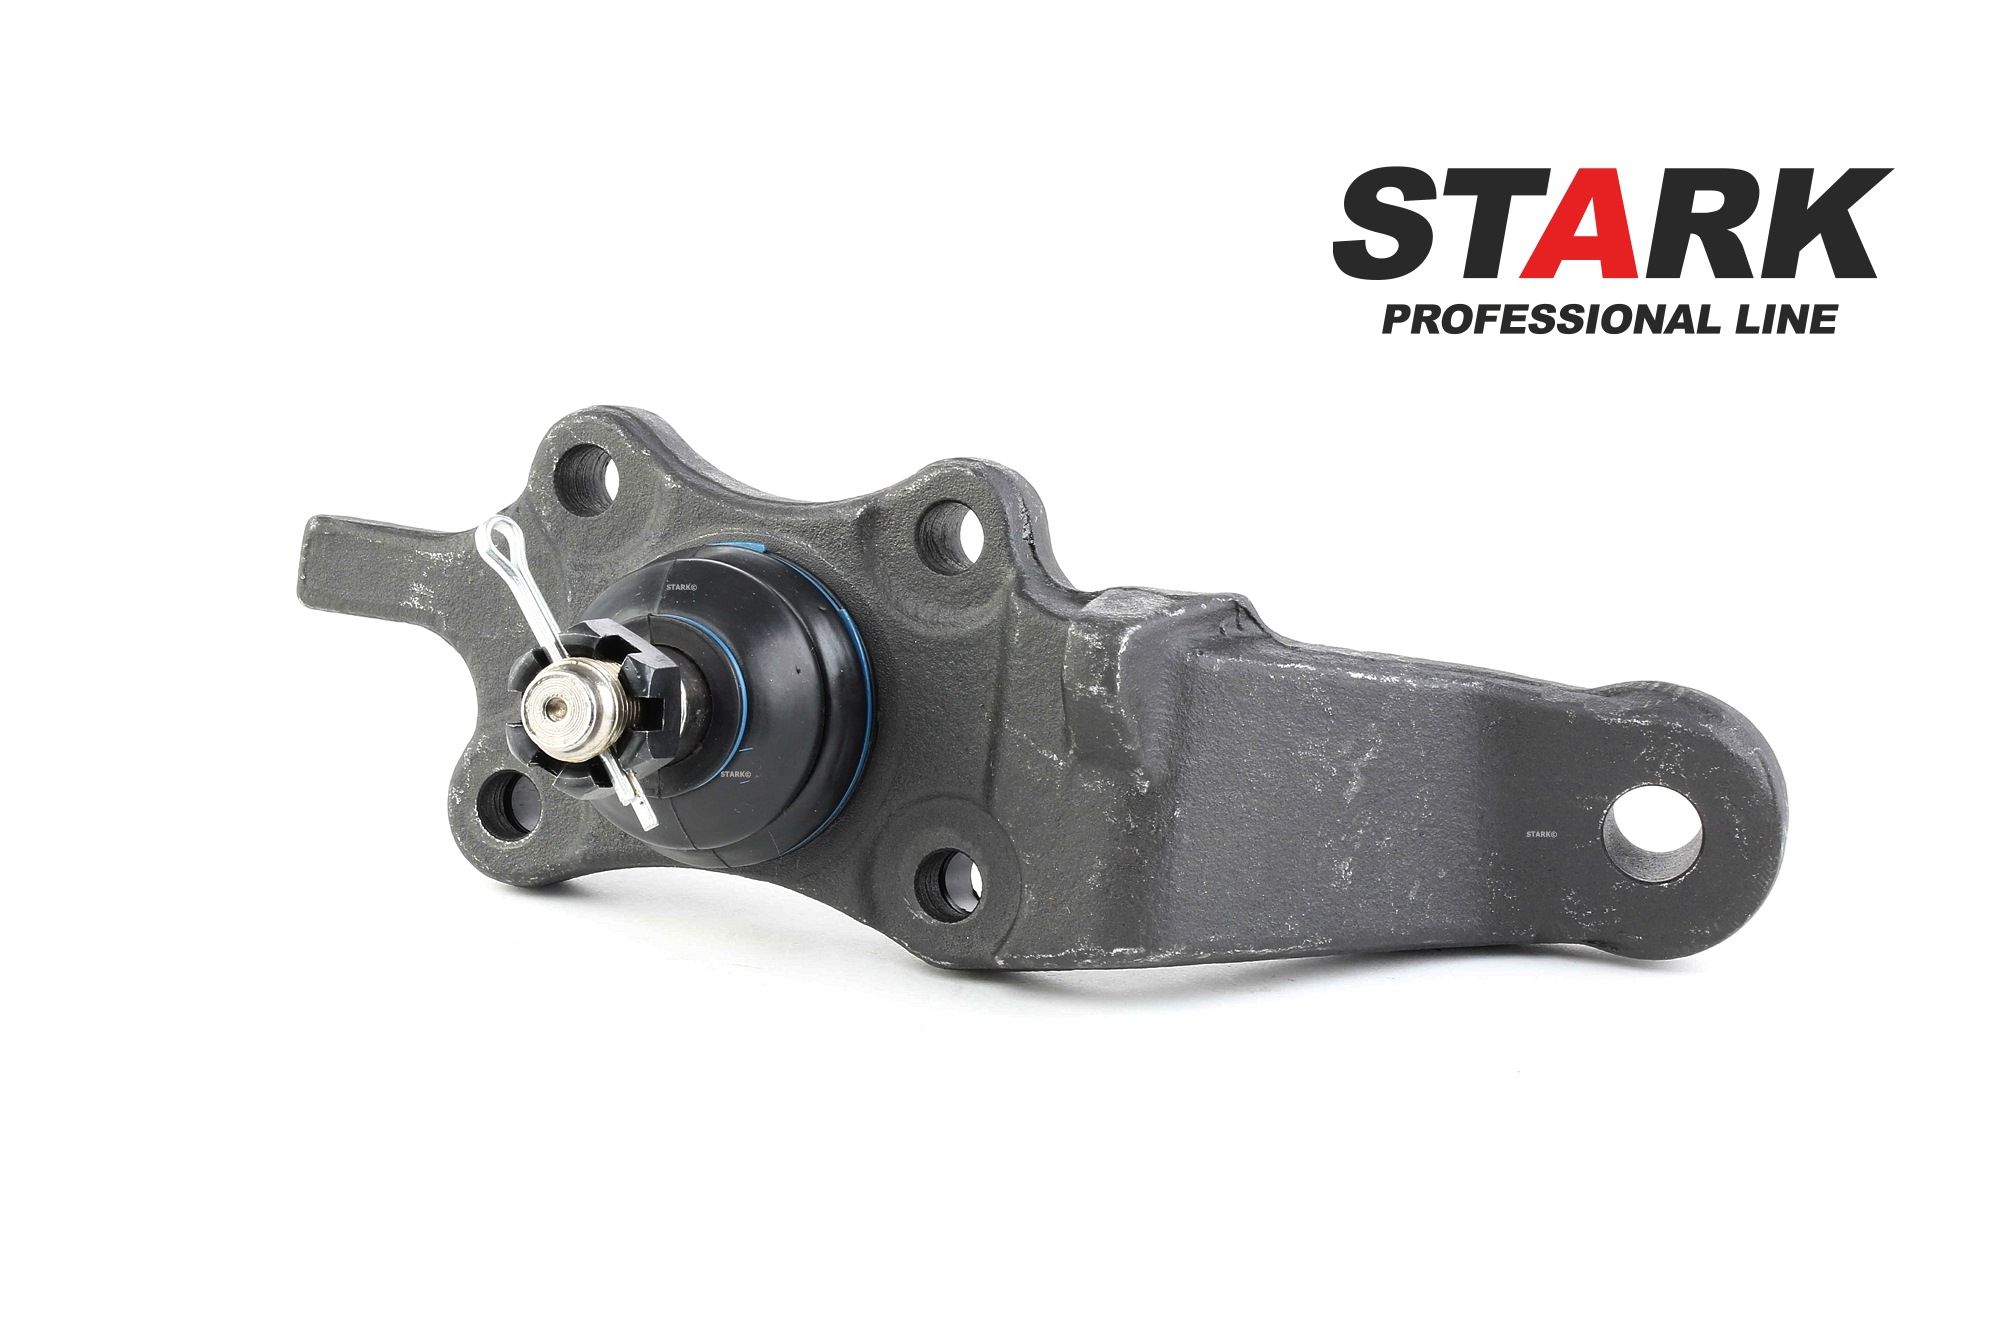 Original SKSL-0260243 STARK Ball joint experience and price